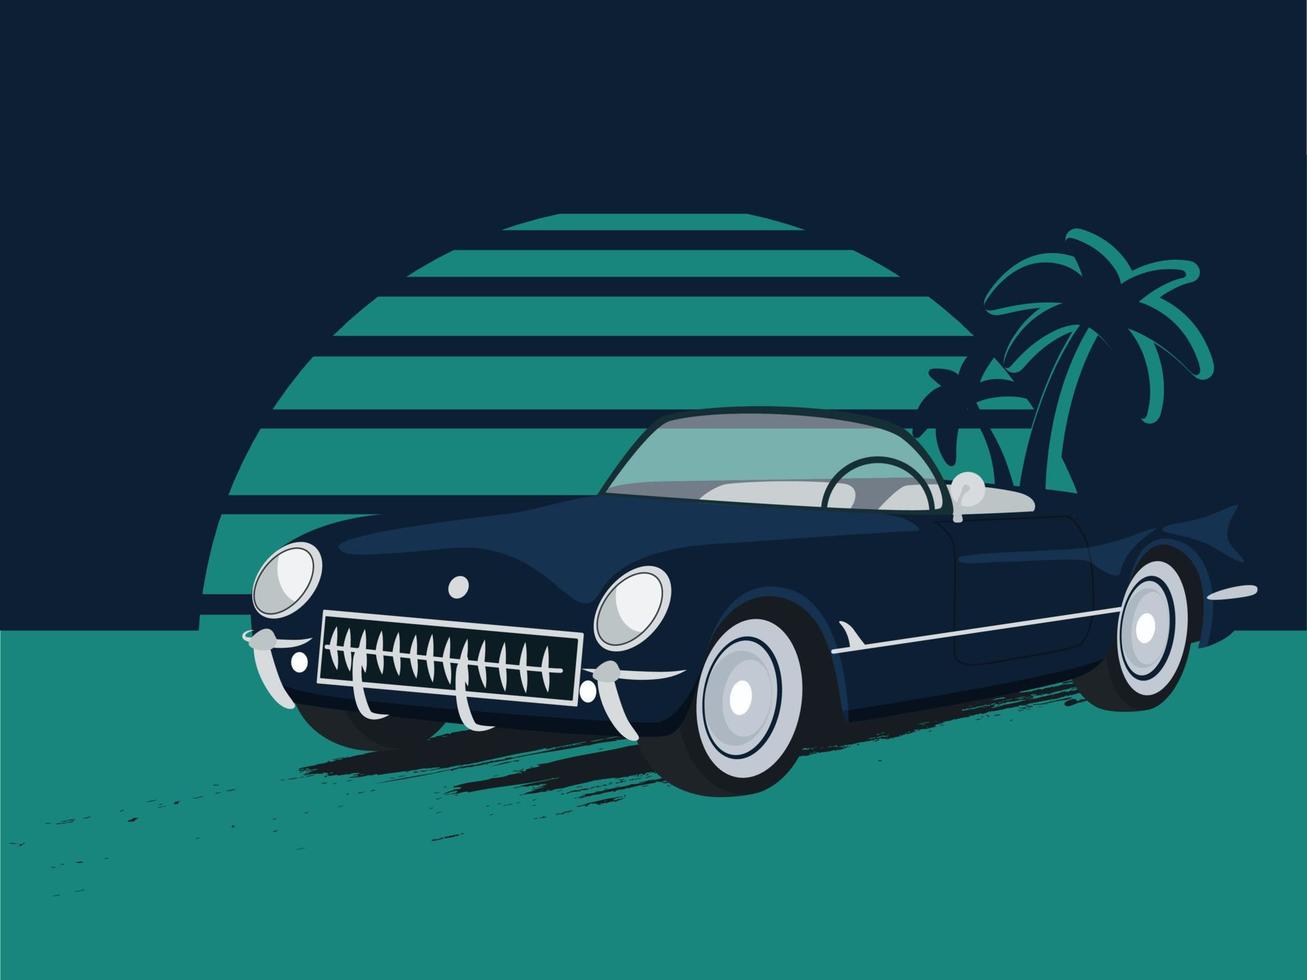 Retro car on background of sun and palm trees design vector